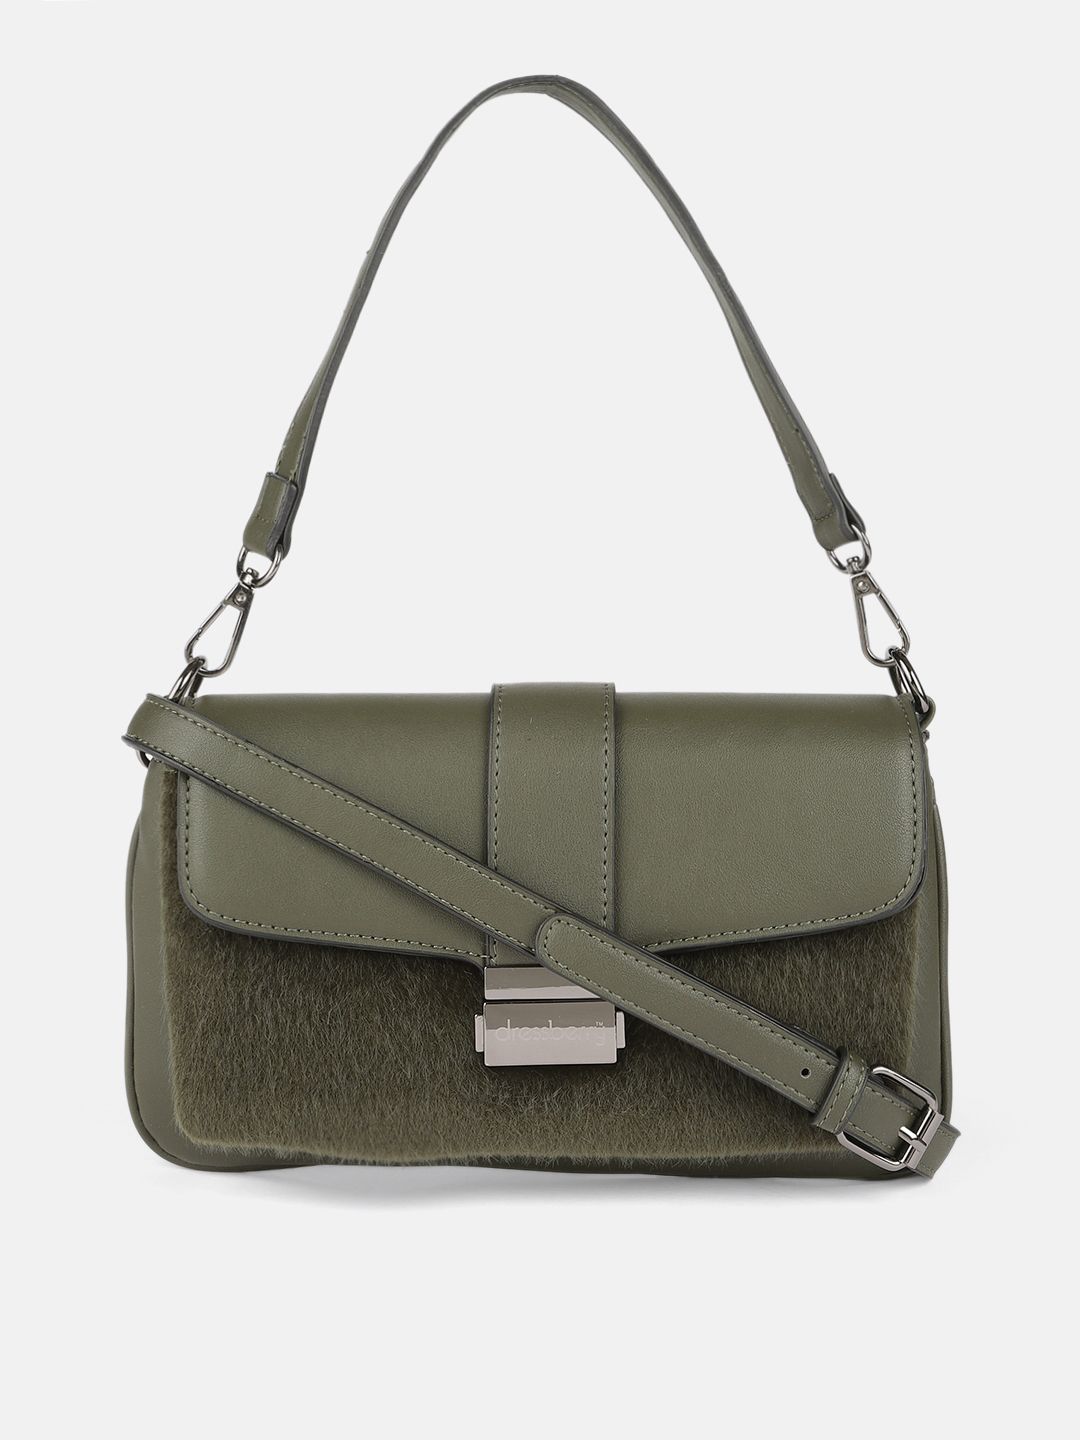 DressBerry Olive Green Structured Satchel Price in India